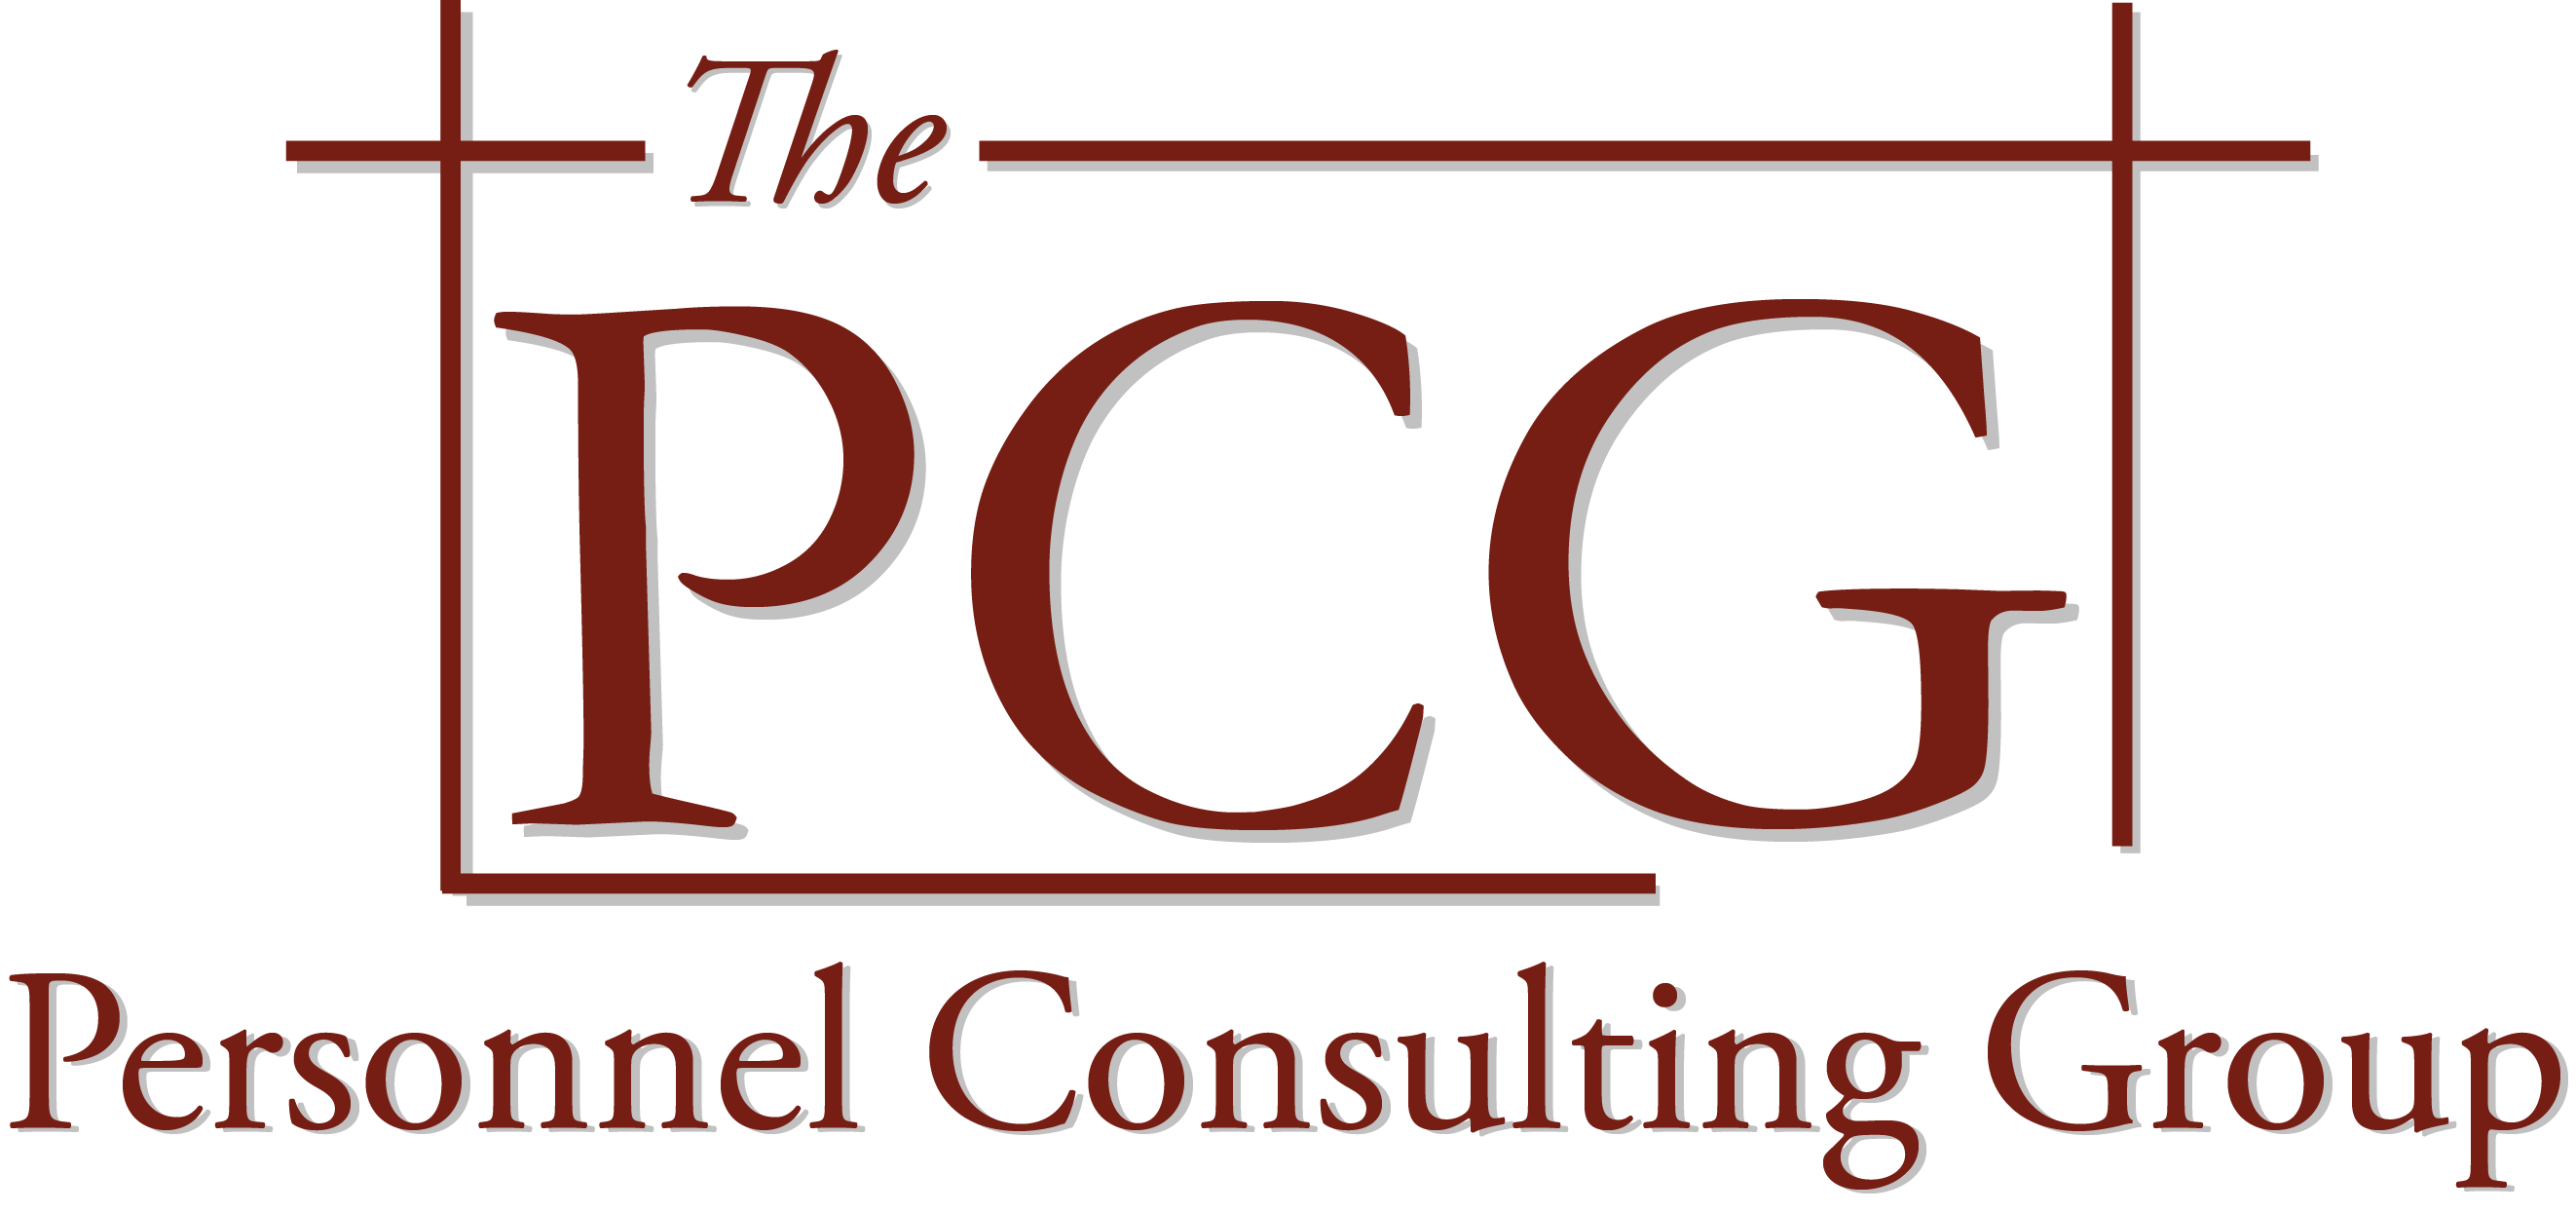 The Personnel Consulting Group